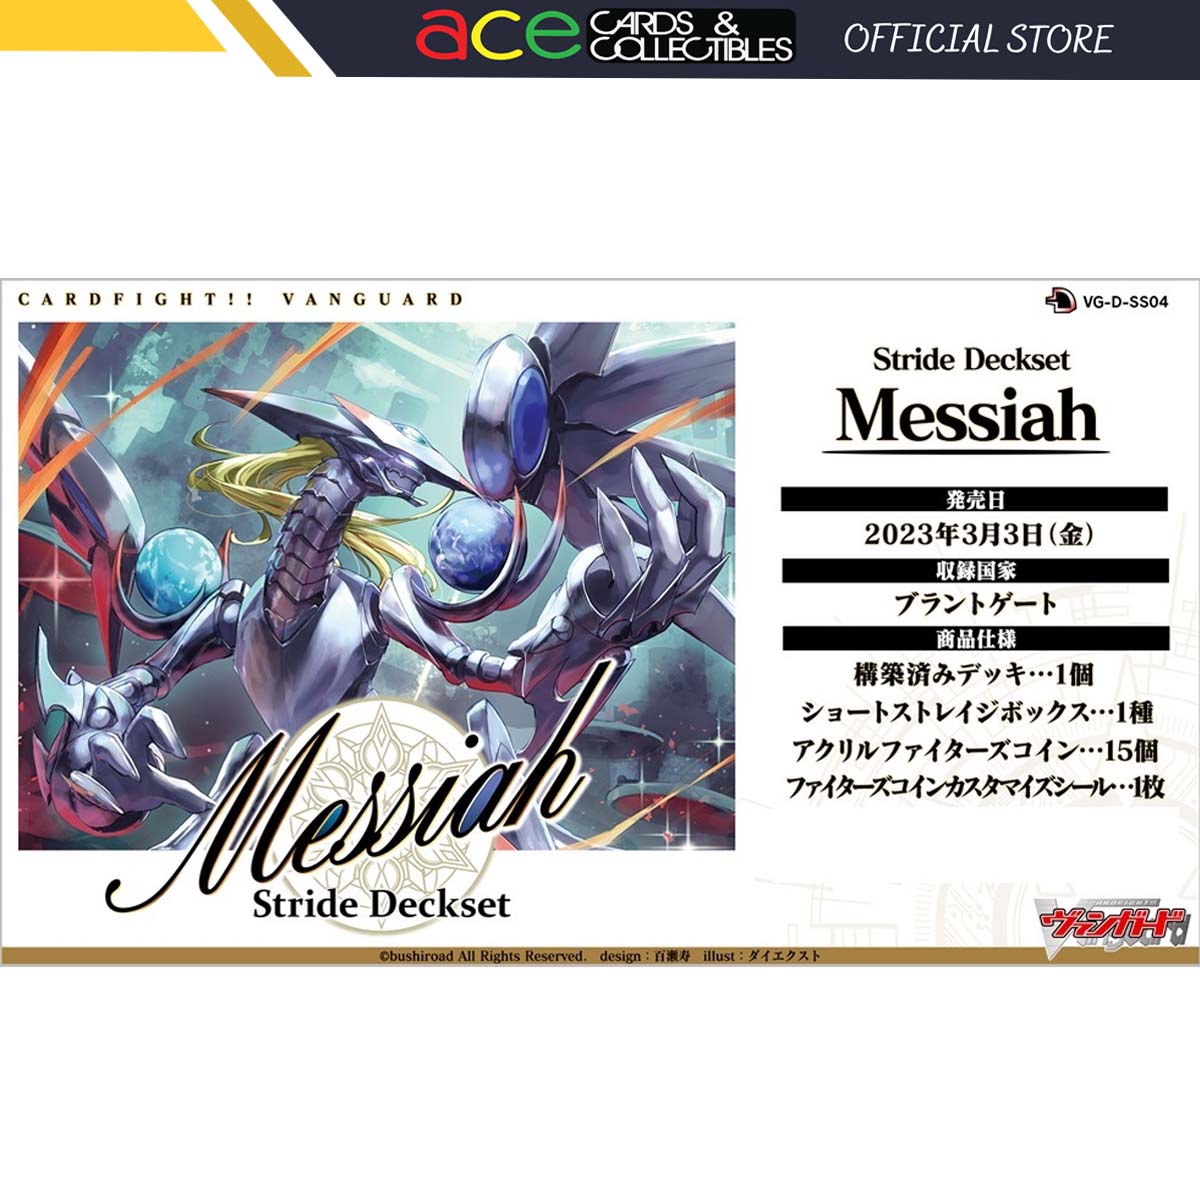 Cardfight!! Vanguard OverDress Special Series Vol. 4 &quot;Stride Deckset Messiah&quot; [VG-D-SS04] (Japanese)-Bushiroad-Ace Cards &amp; Collectibles